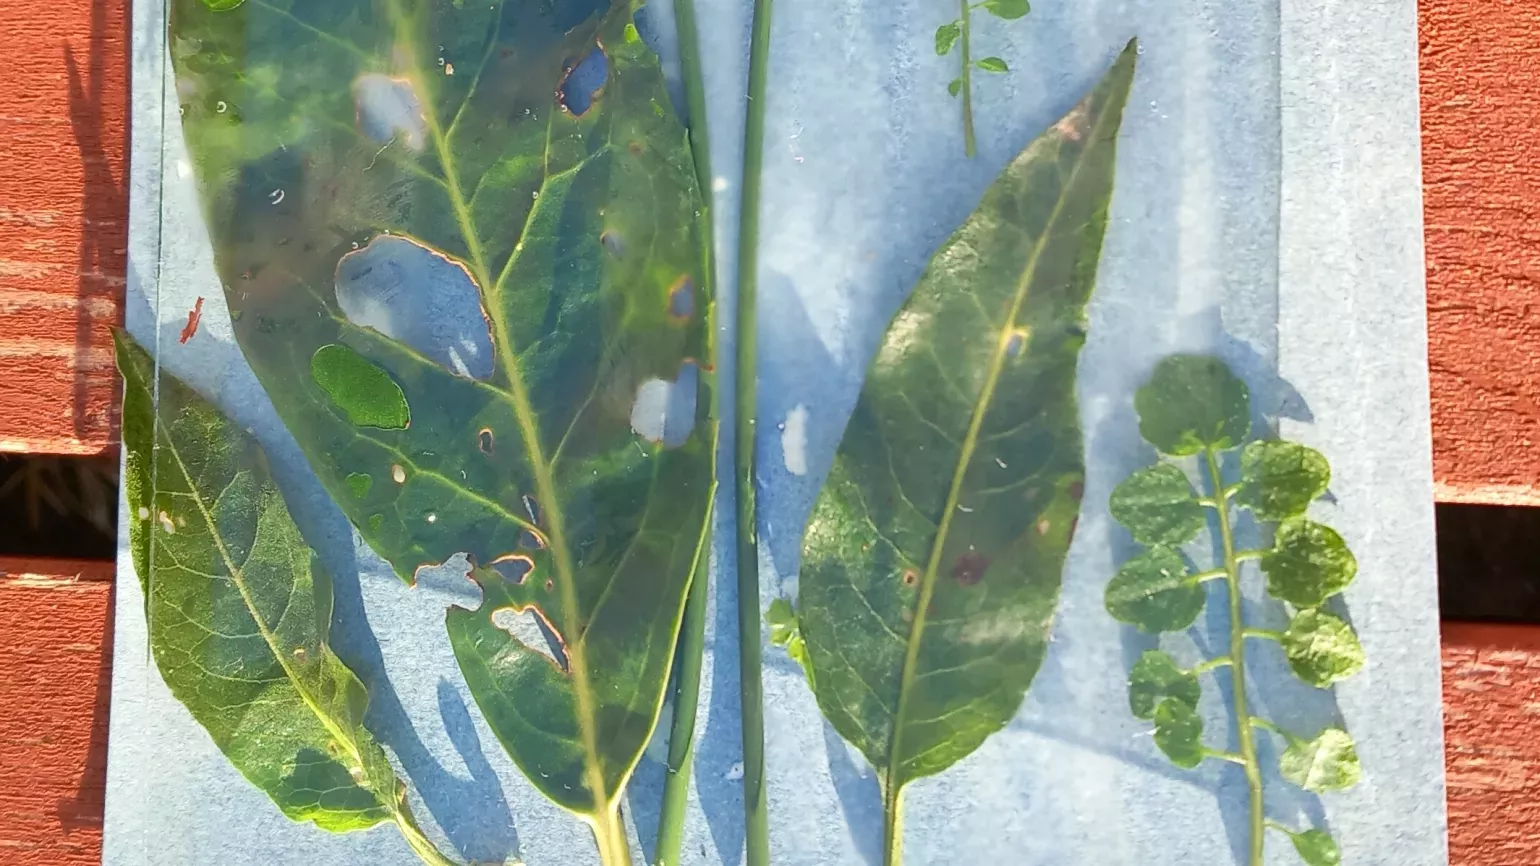 Leaves on chemically-treated paper, covered with a pain of glass, and placed in the sun